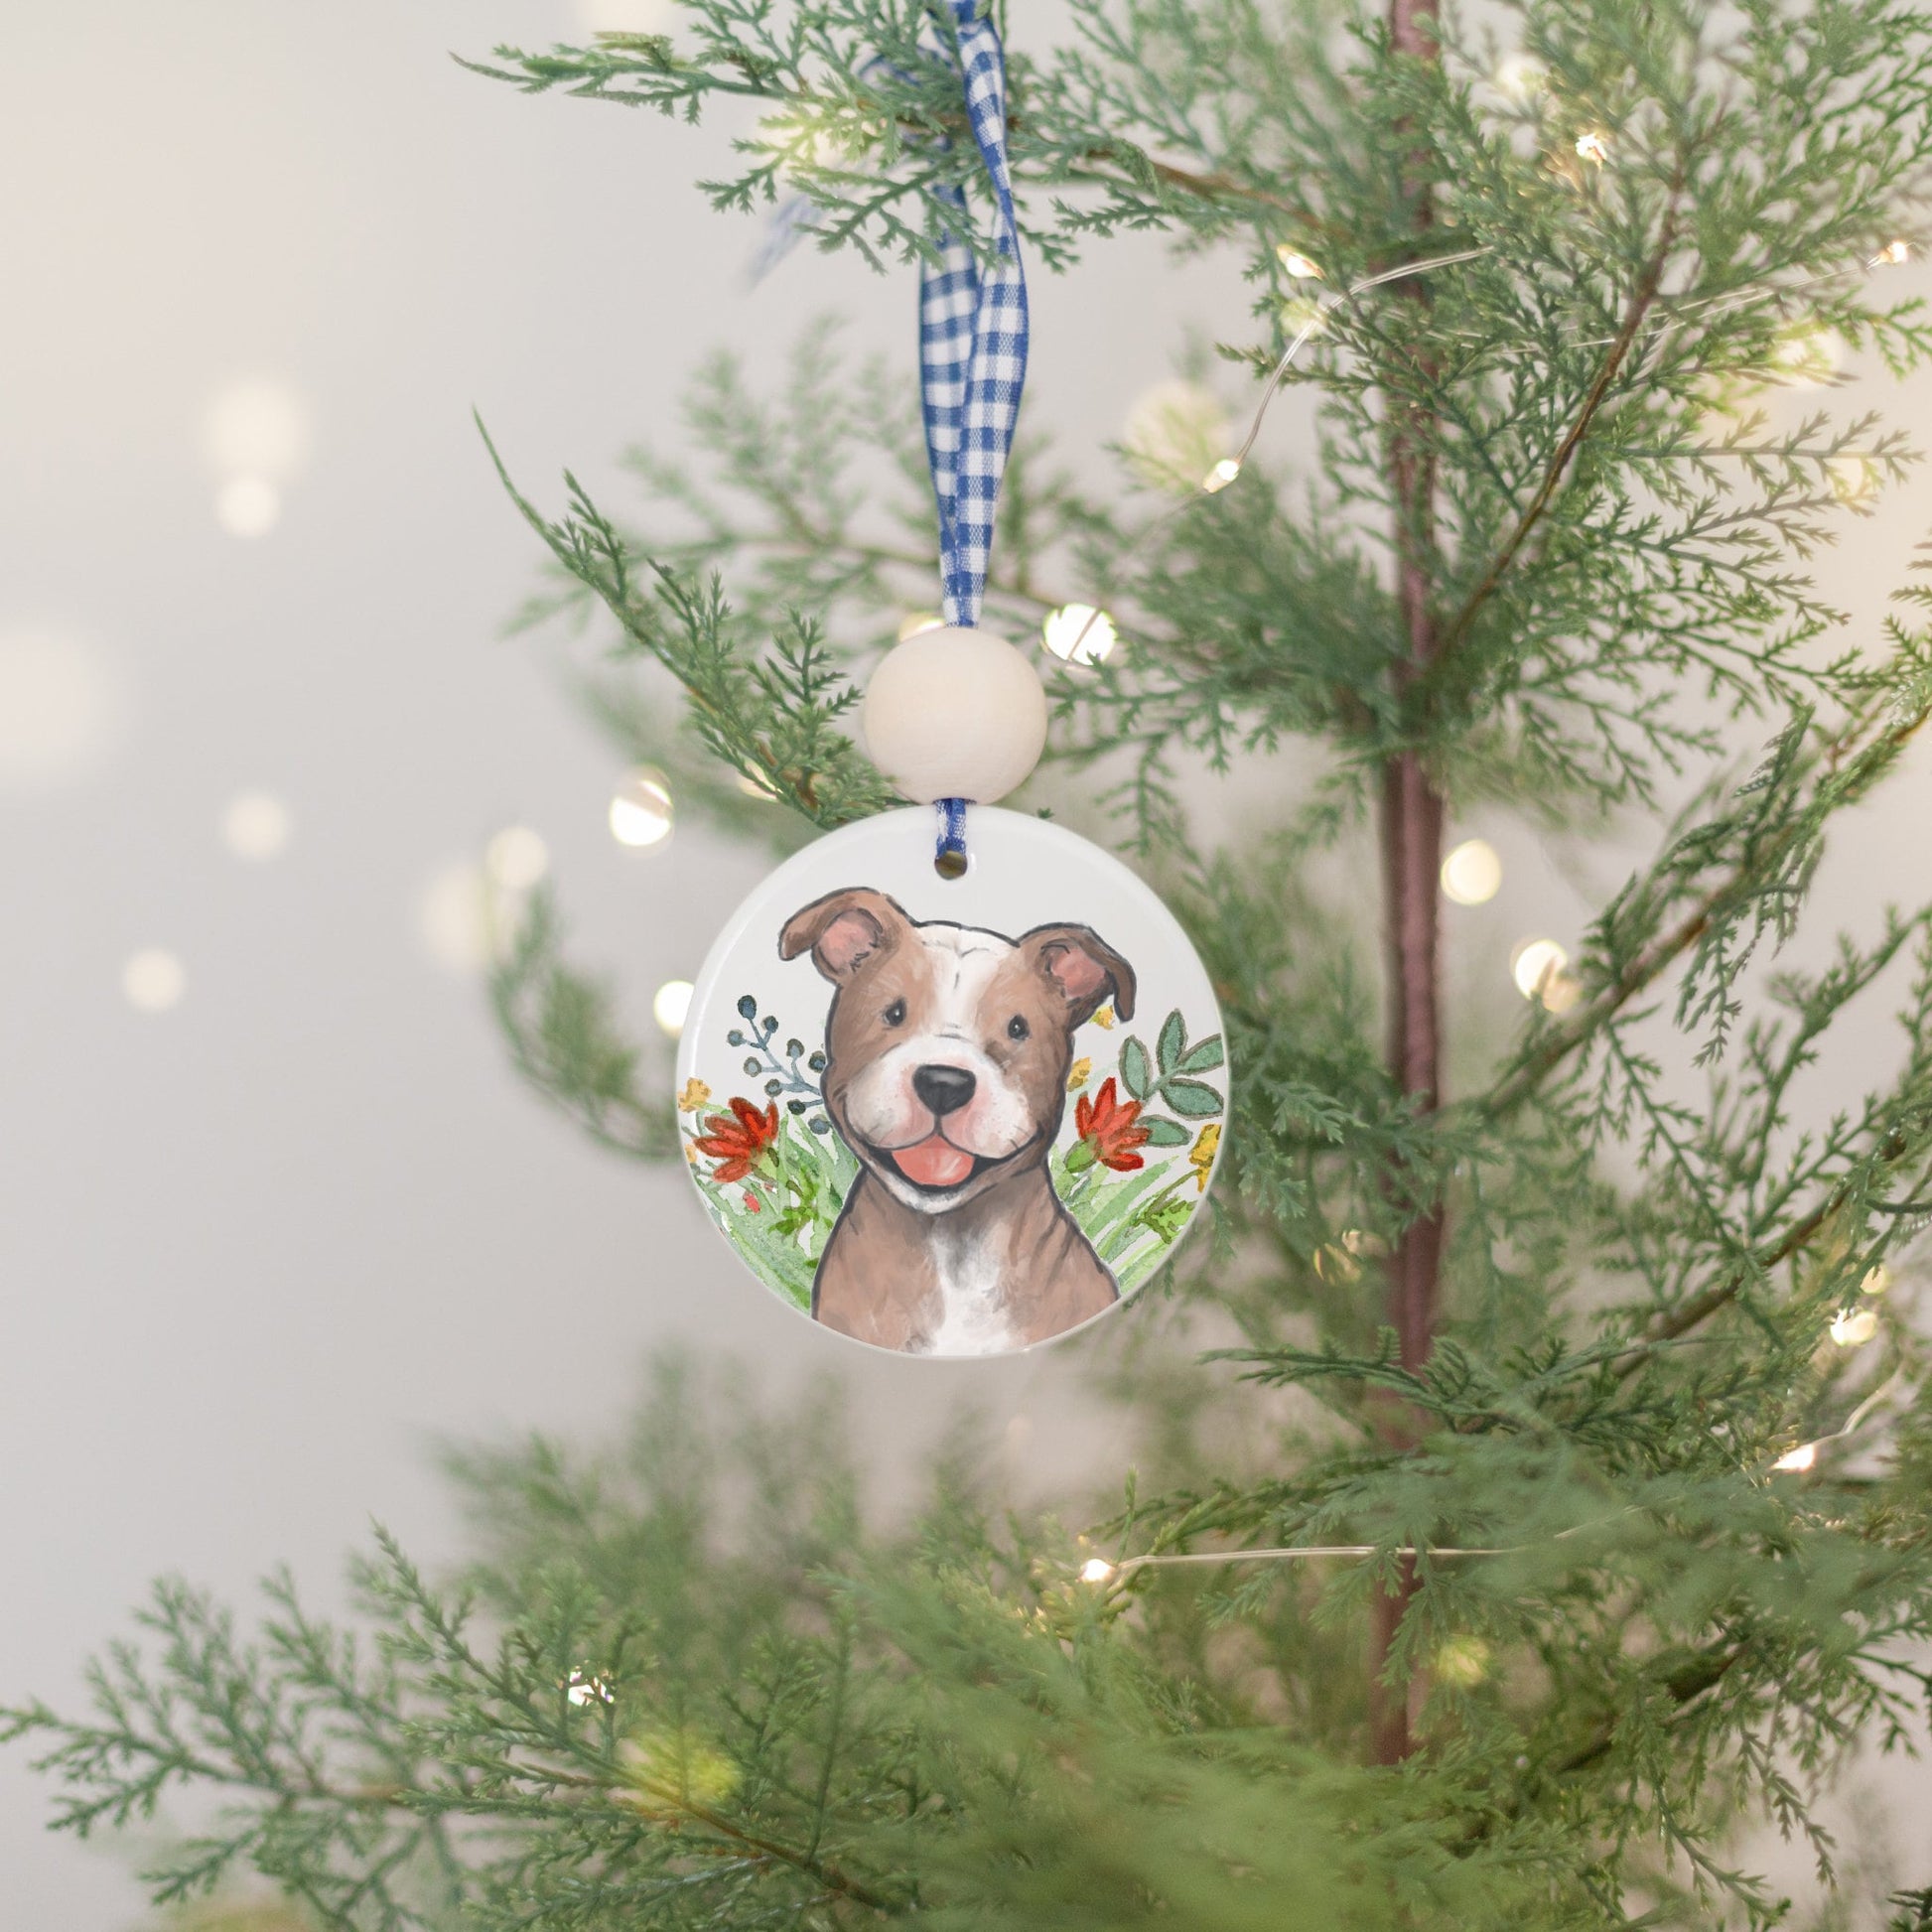 Ceramic ornament with painting of a happy brown and white pitbull dog and colorful flowers